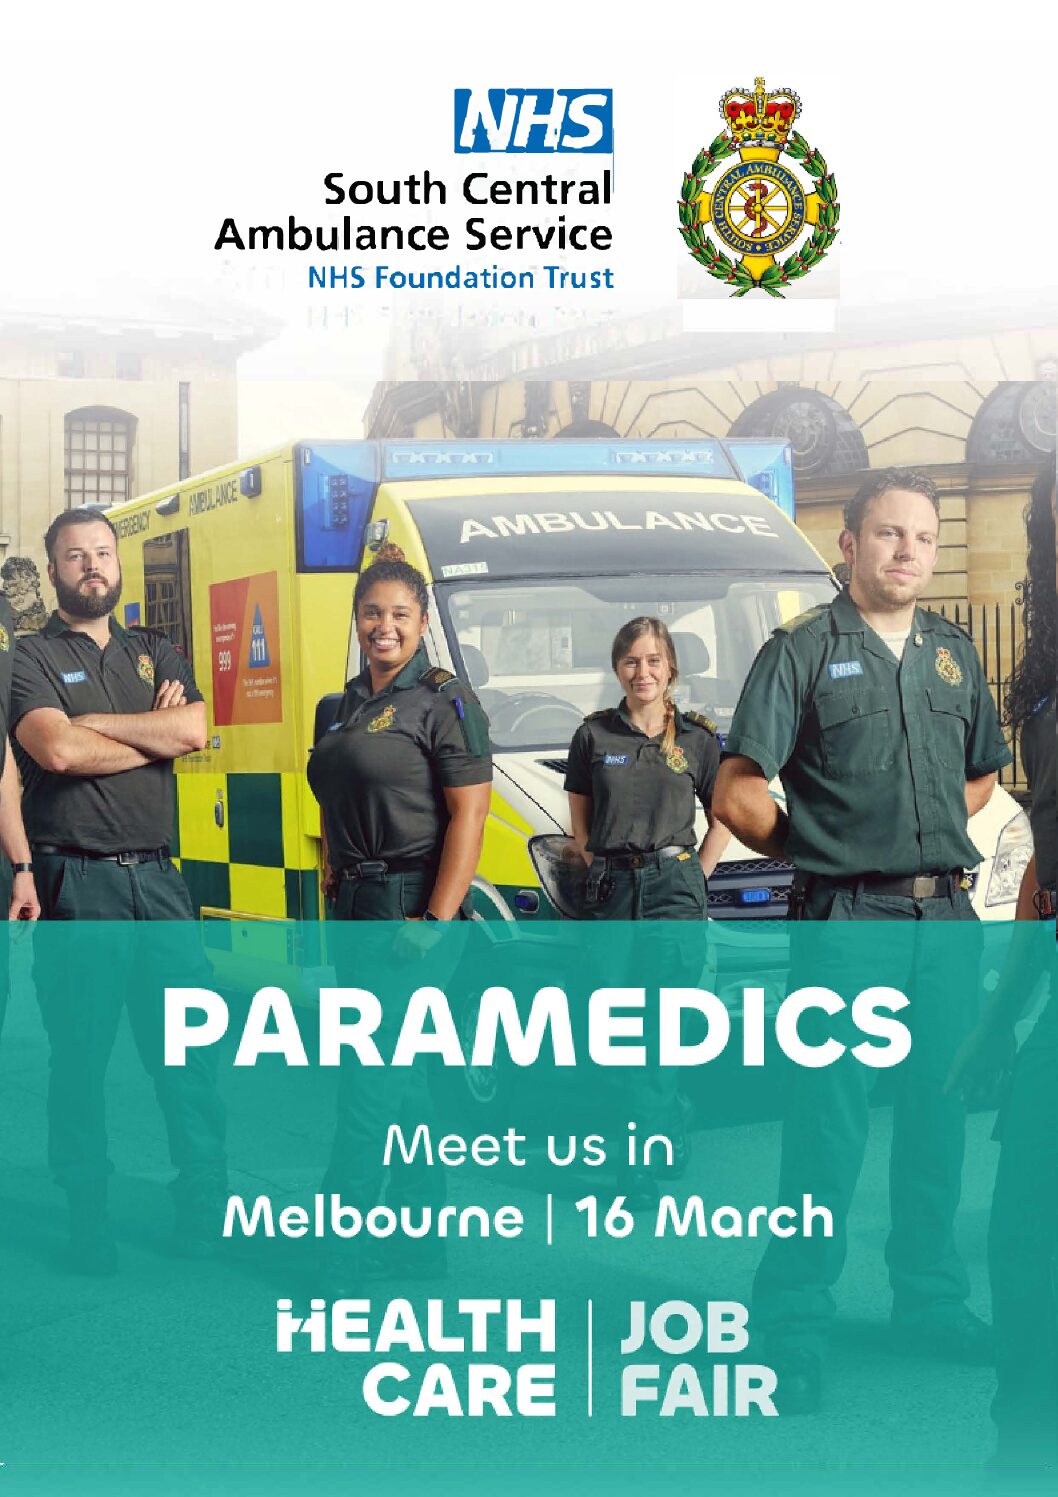 We’re recruiting for Paramedics in Australia!